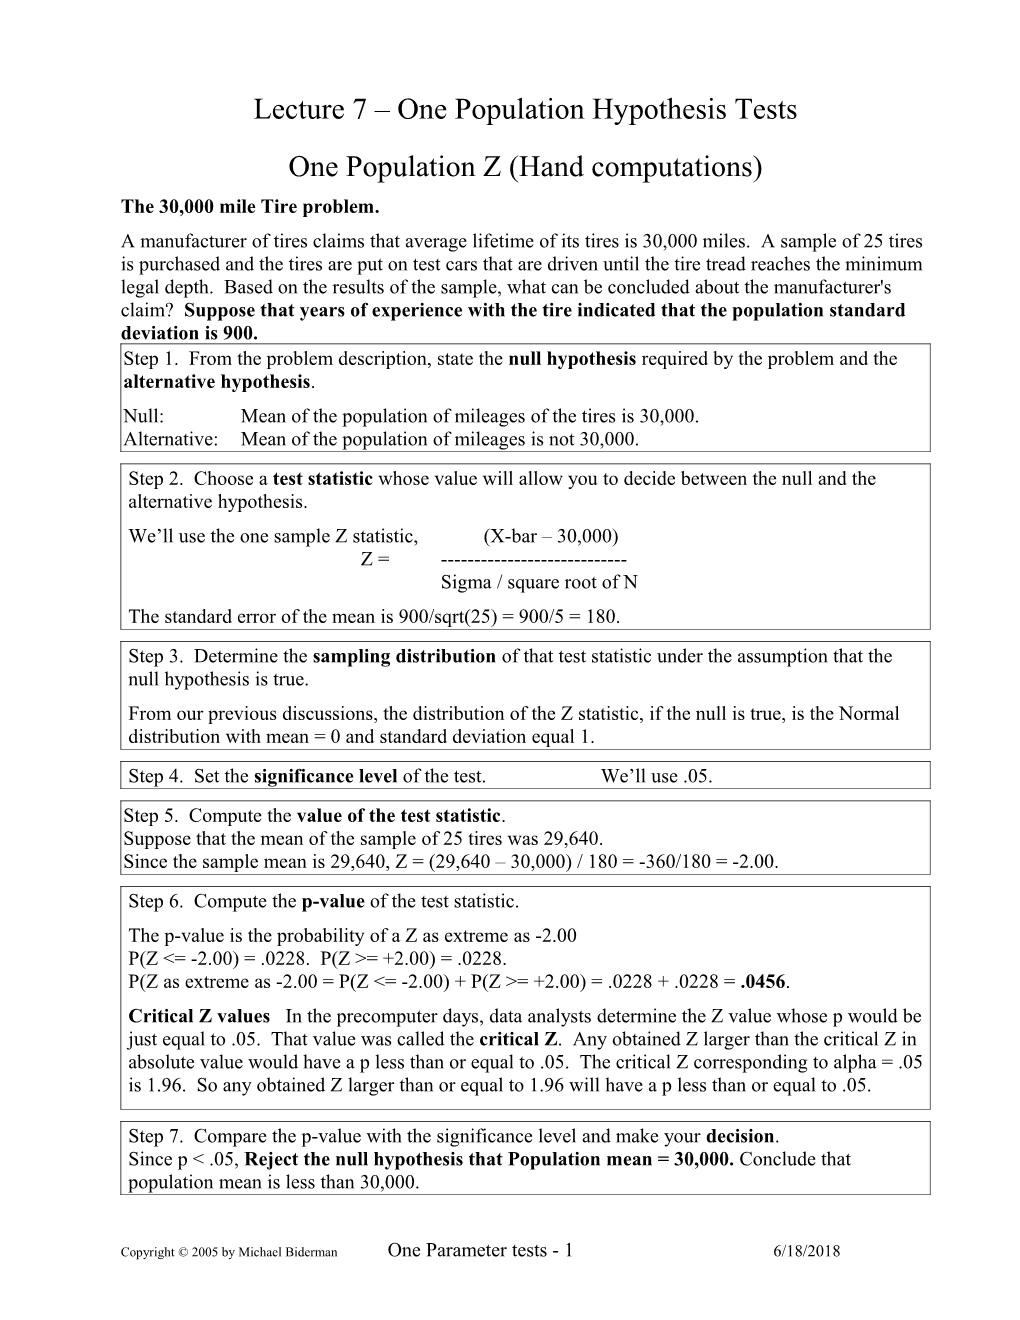 Lecture 7 One Population Hypothesis Tests